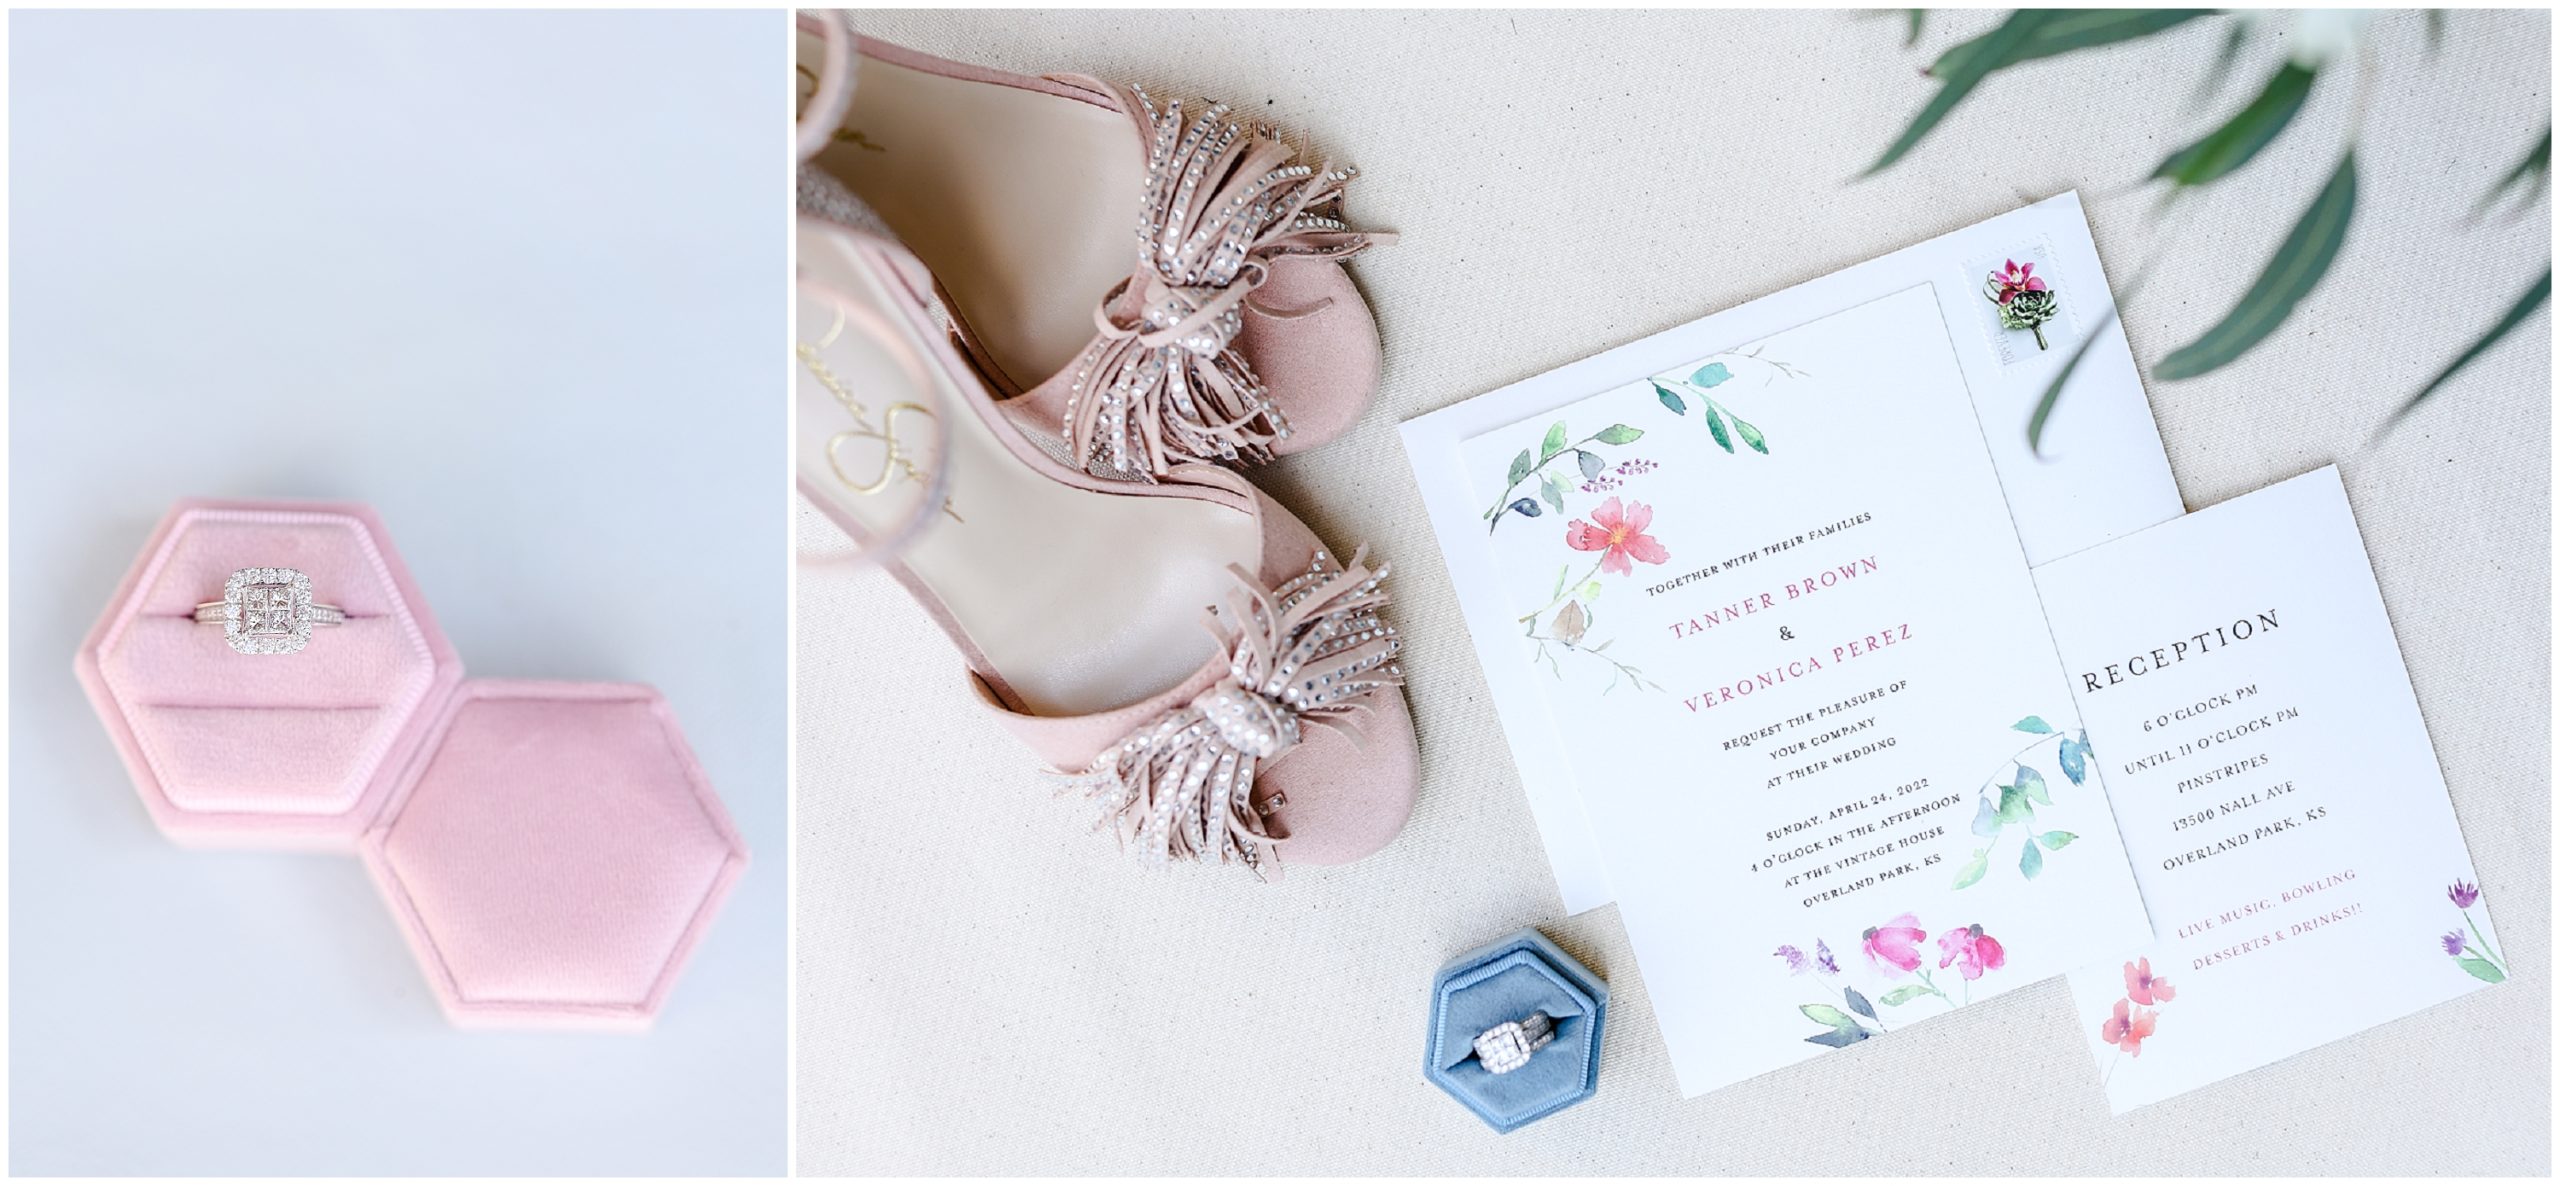 weddomg shoes and details - loose park wedding photos 